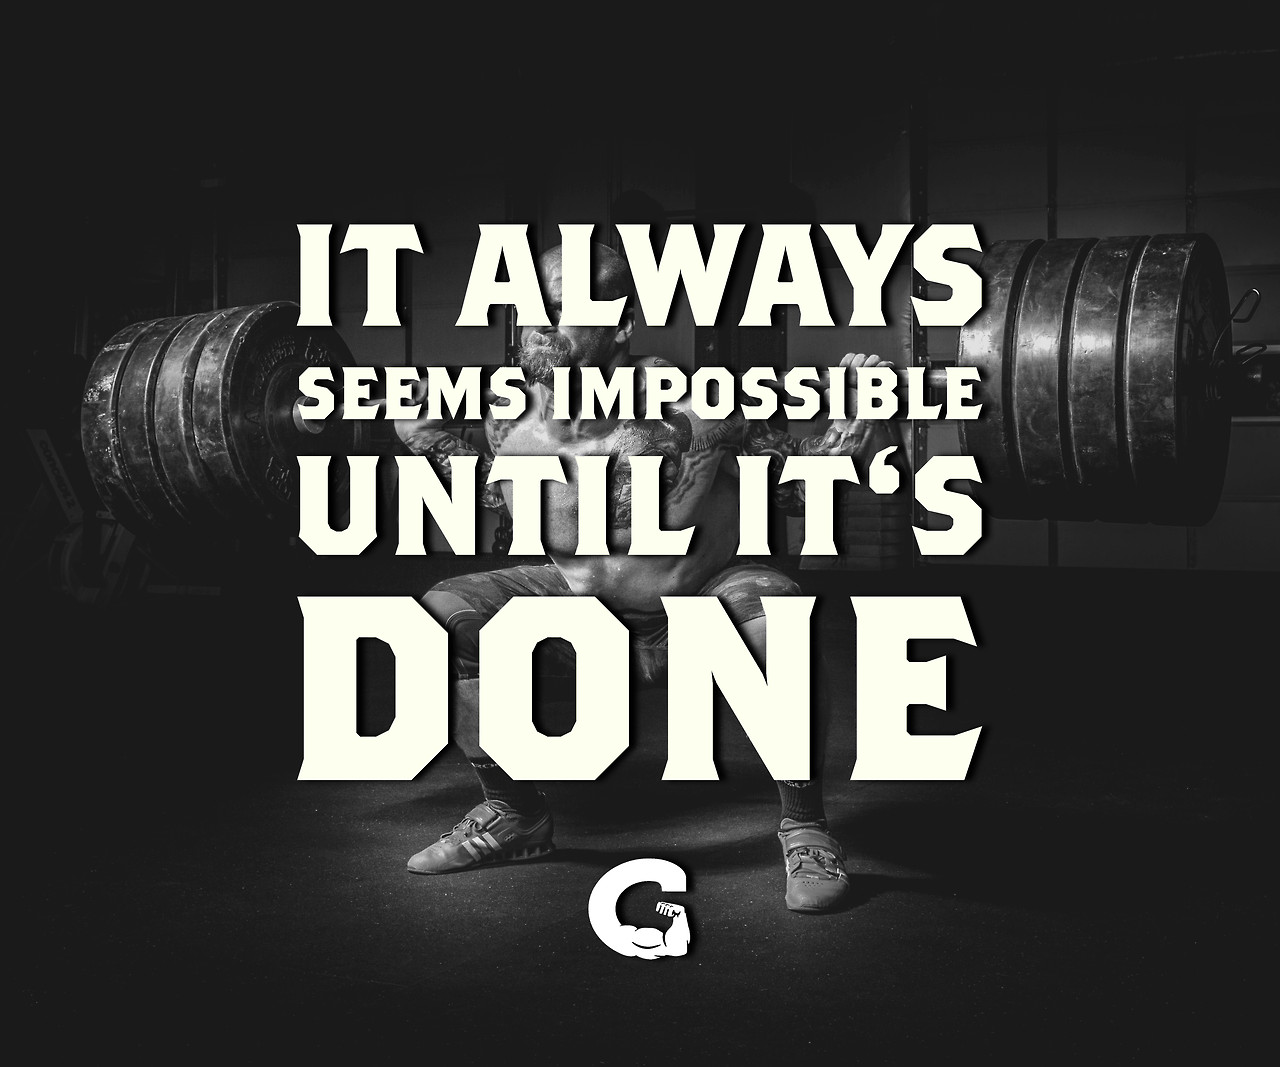 Inspirational Gym Quotes
 Motivational Gym Quotes